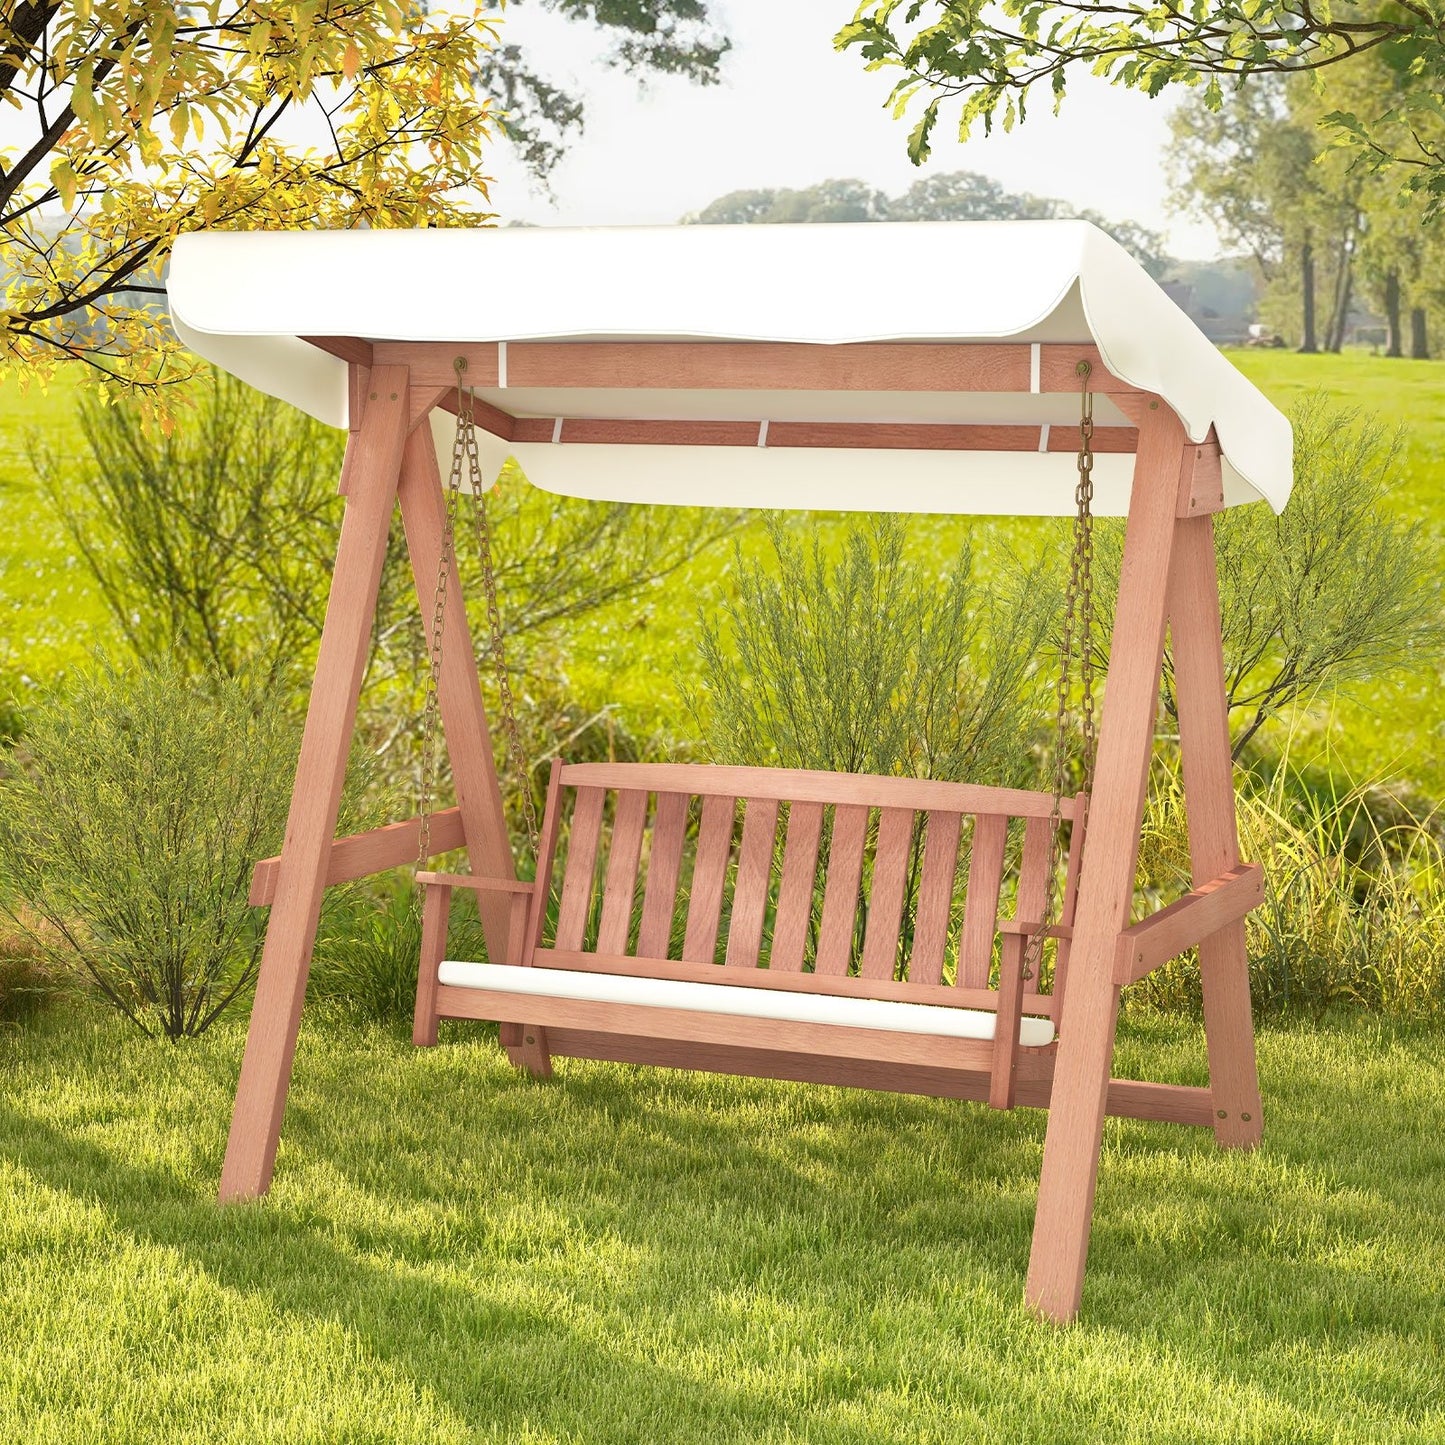 Outdoor 2-Seat Swing Bench w/ith A Frame and Sturdy Metal Hanging Chainsx, Natural